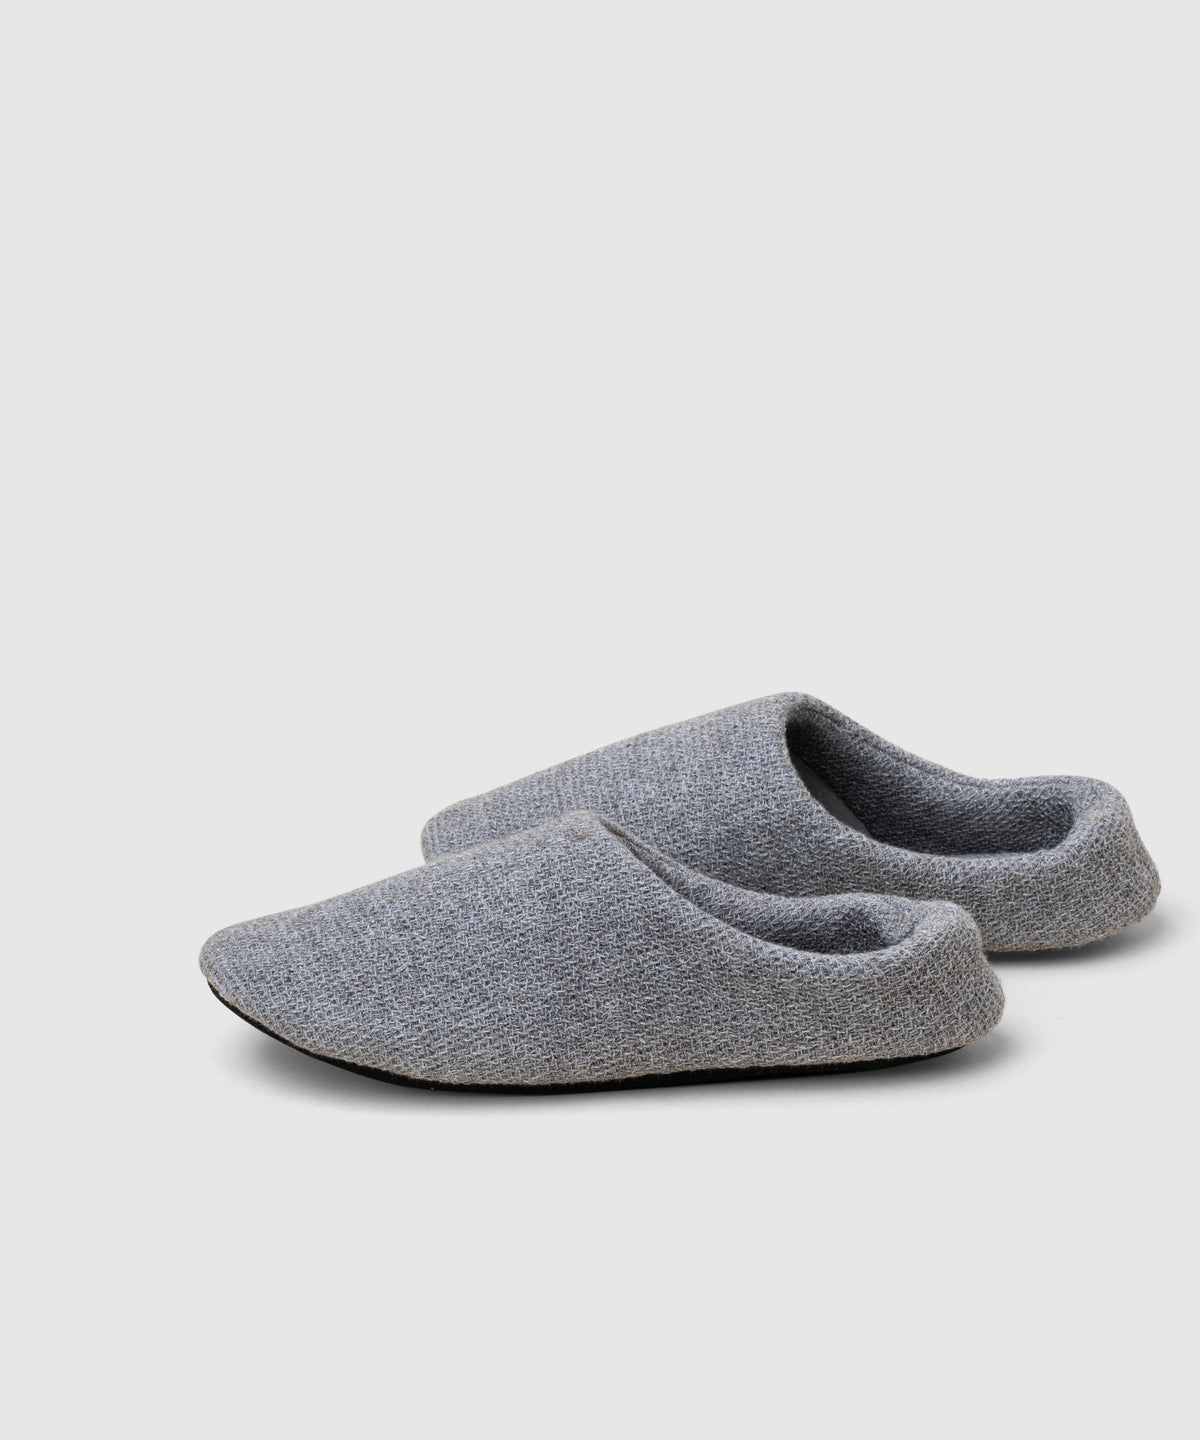 washable house slippers